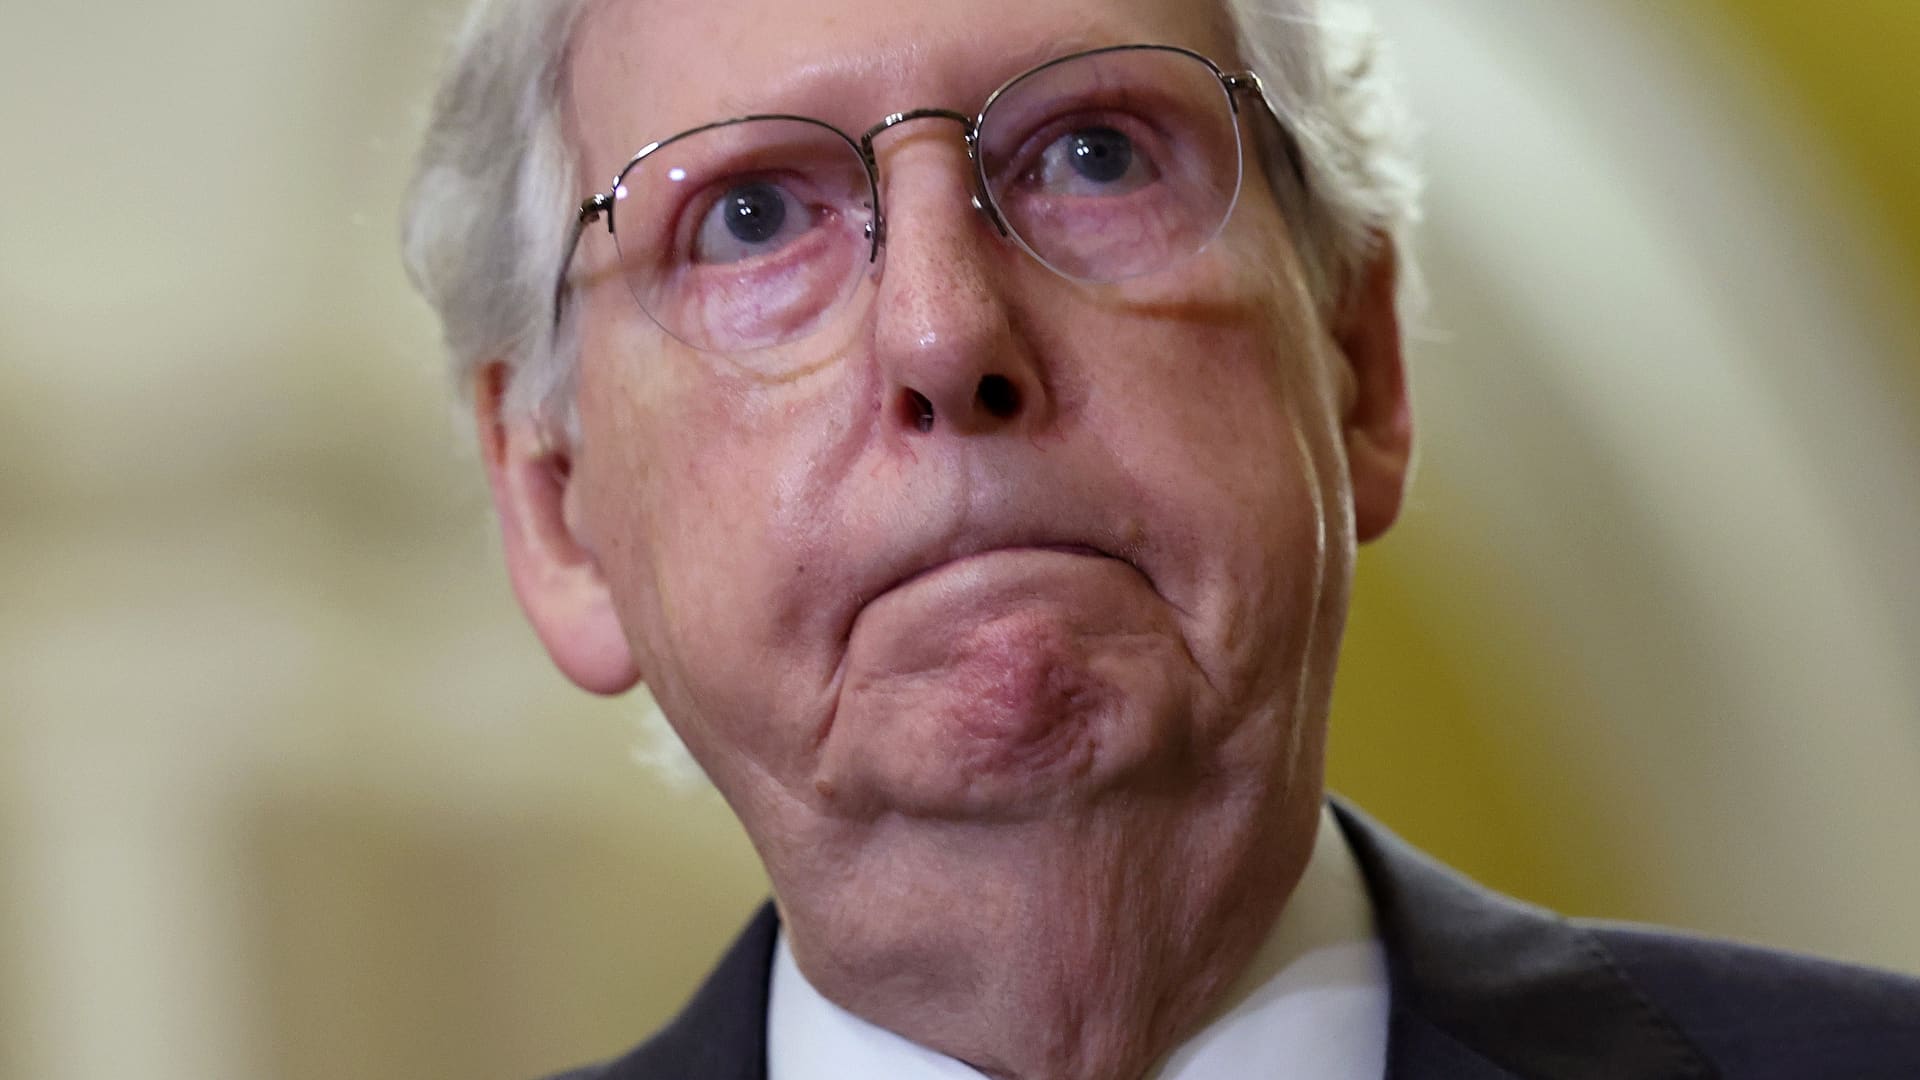 Mitch McConnell freezes, struggles to speak in second incident this summer - CNBC